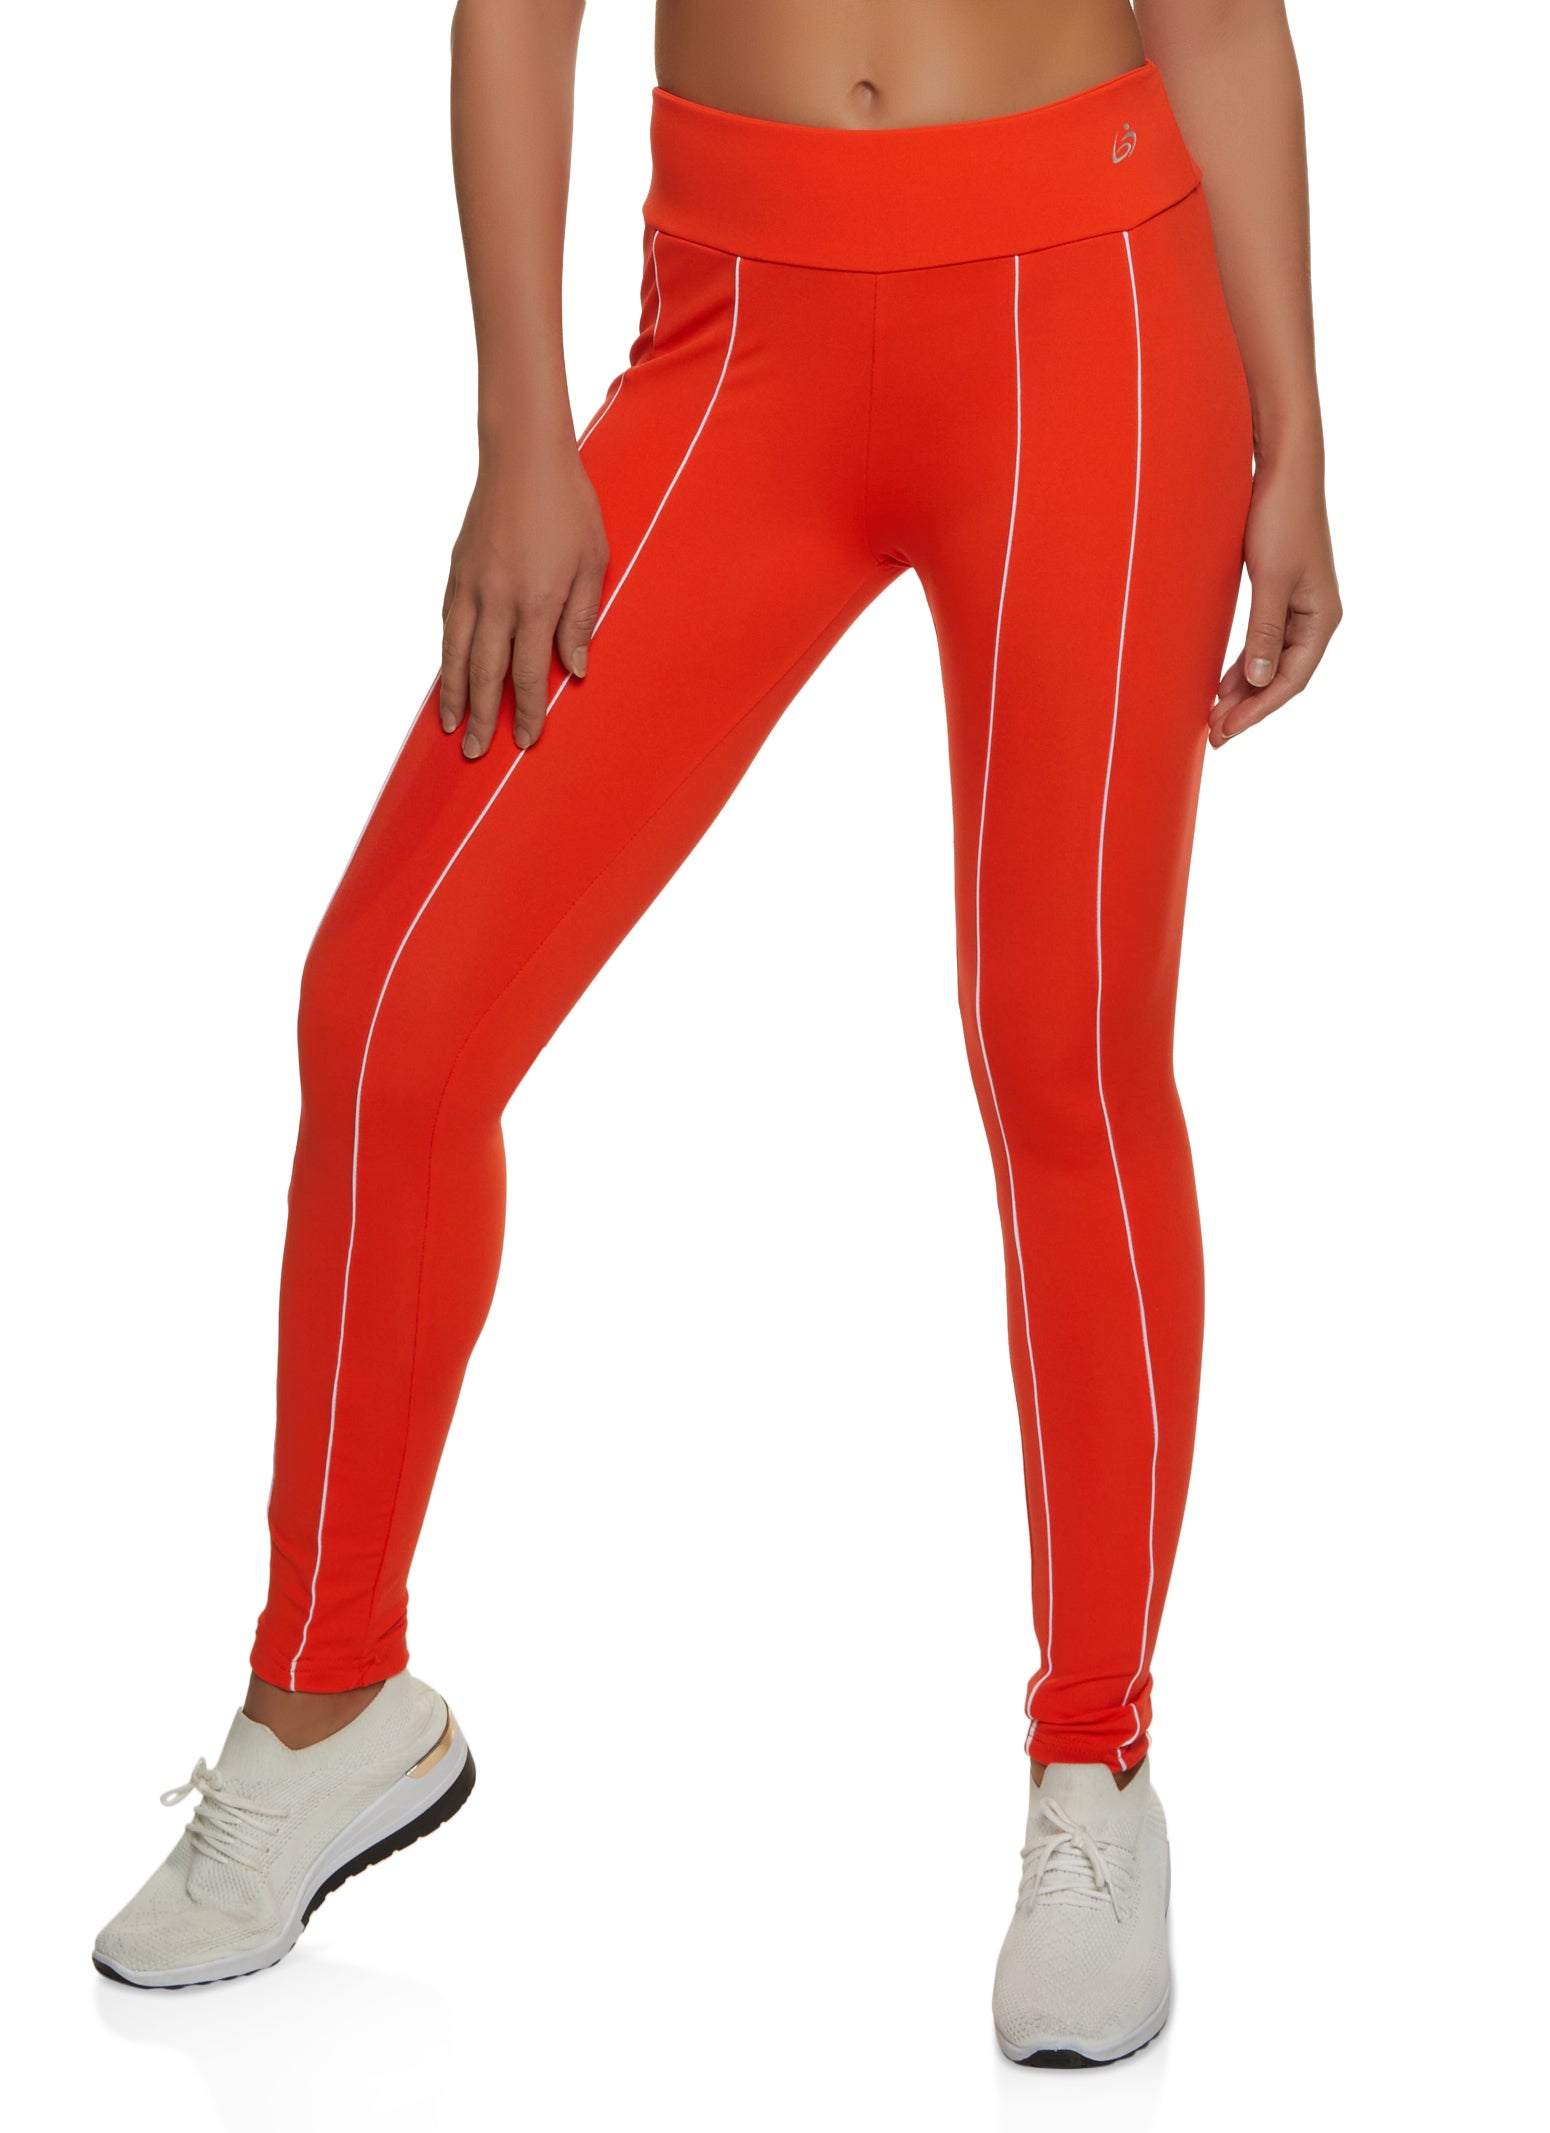 Contrast Piping Detail Leggings - Red